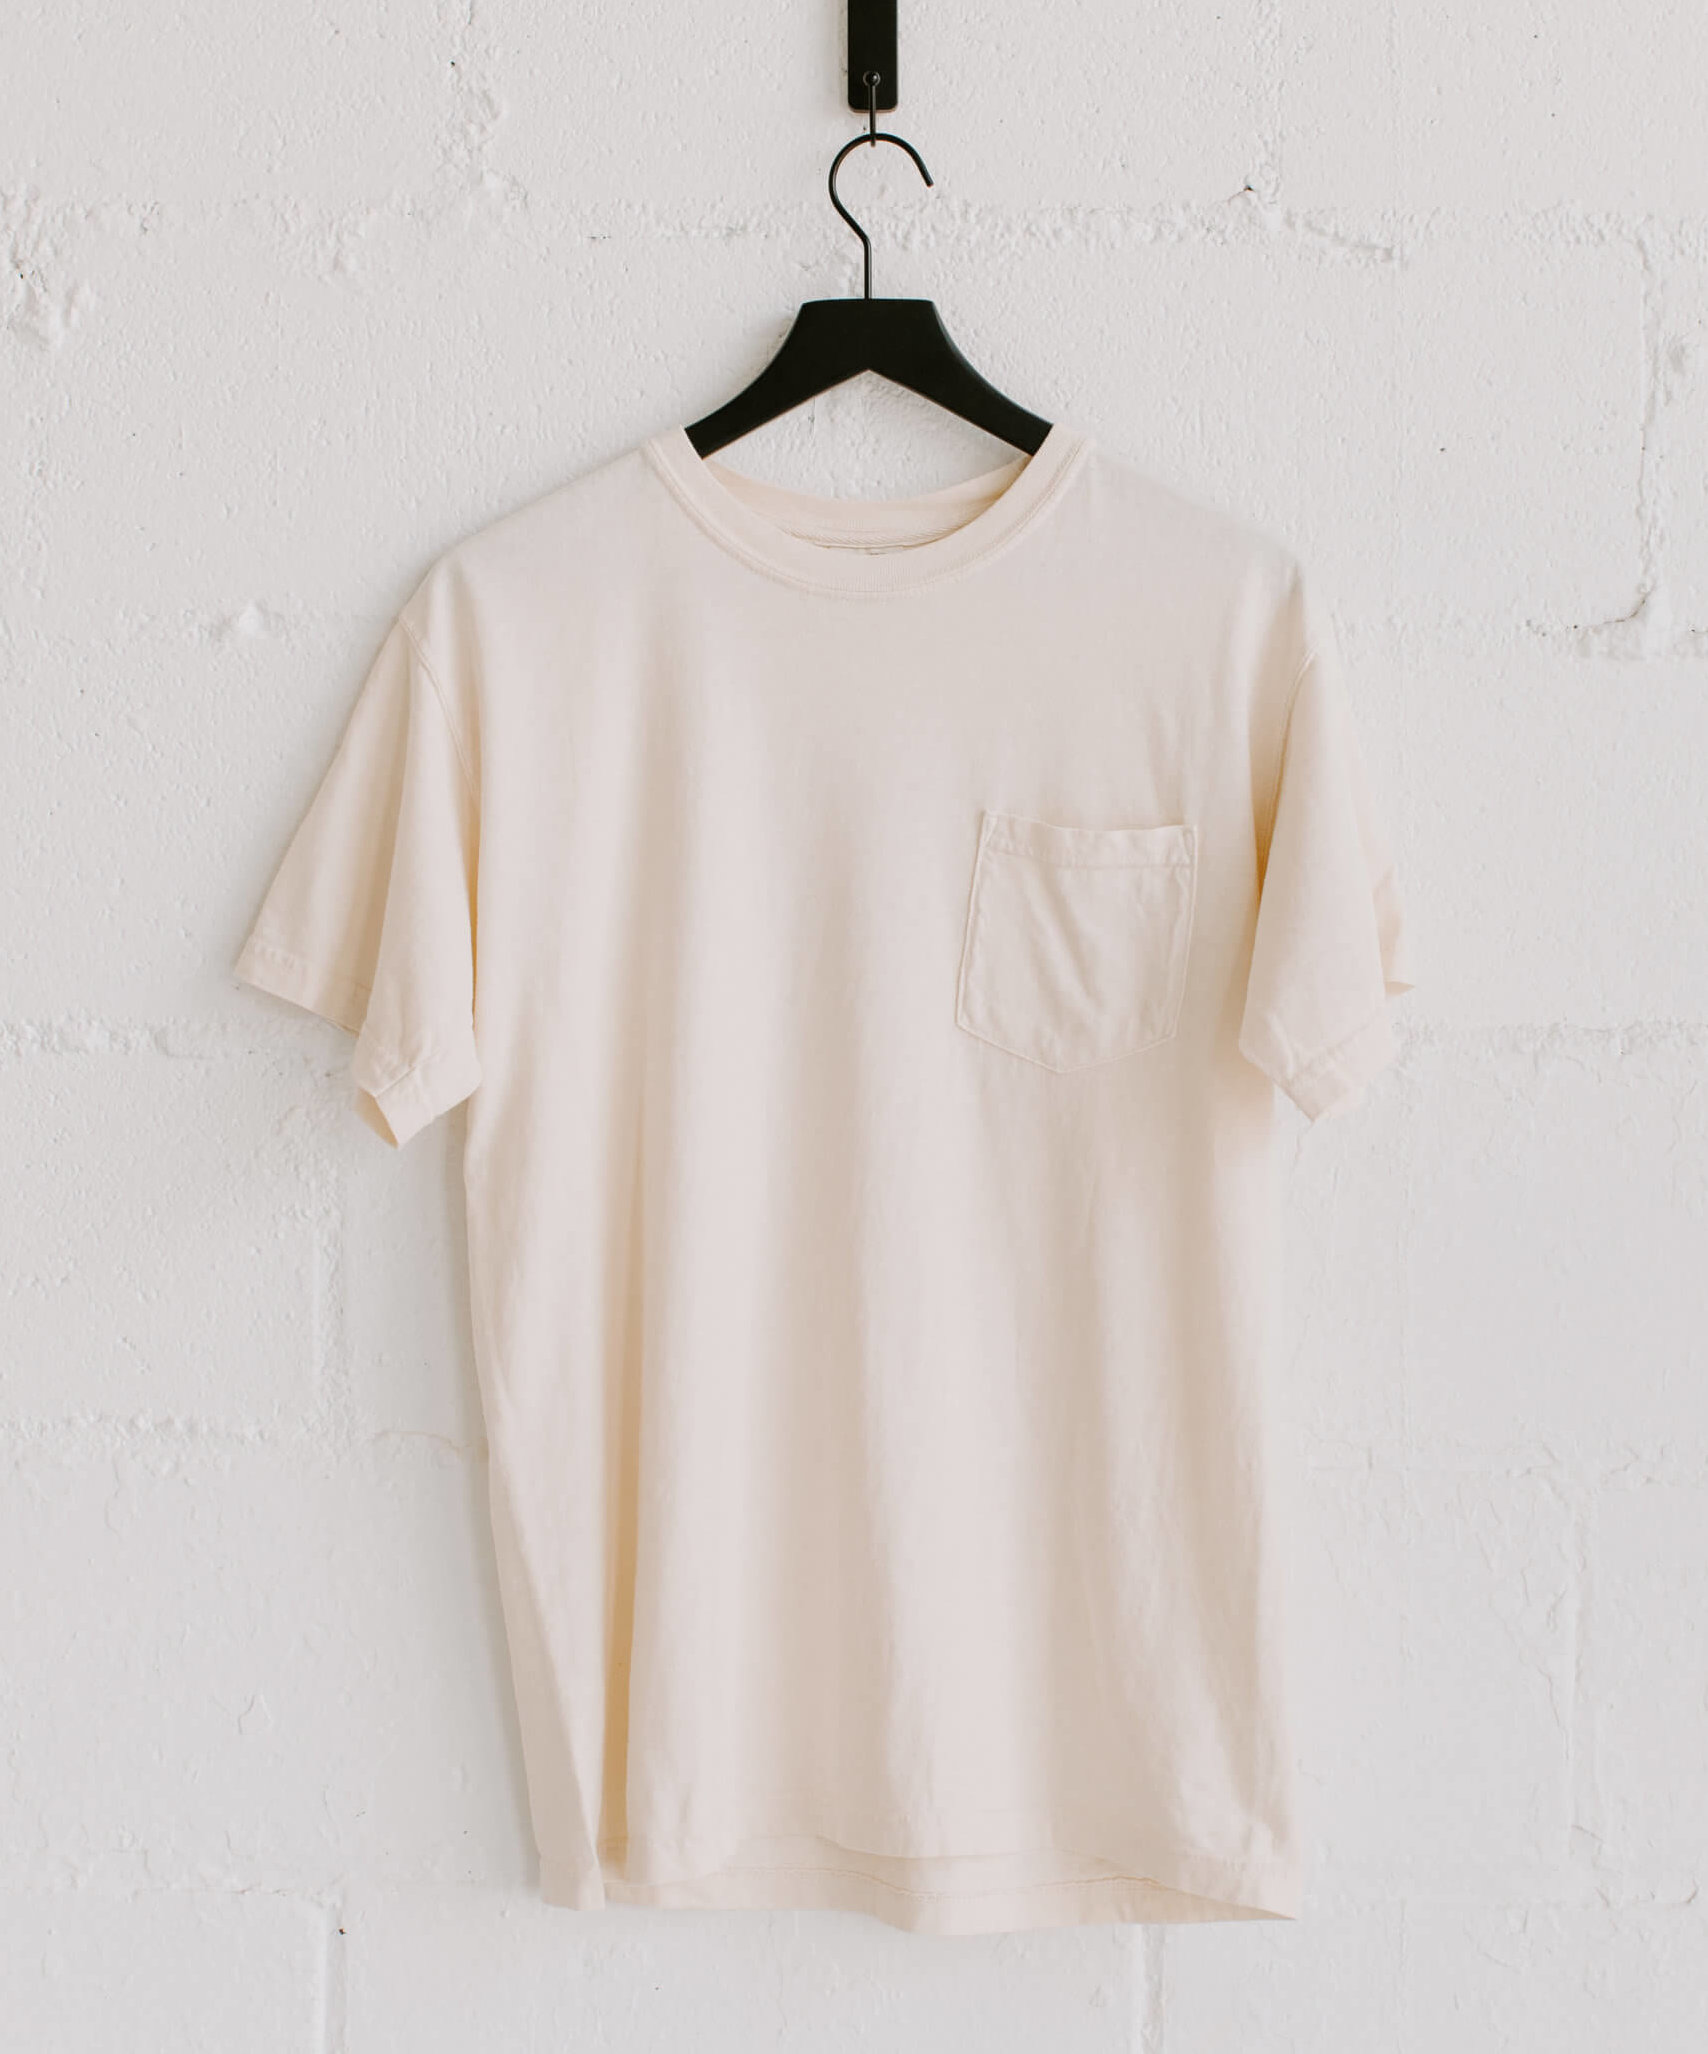 Buy Bloomscape Pocket Tee